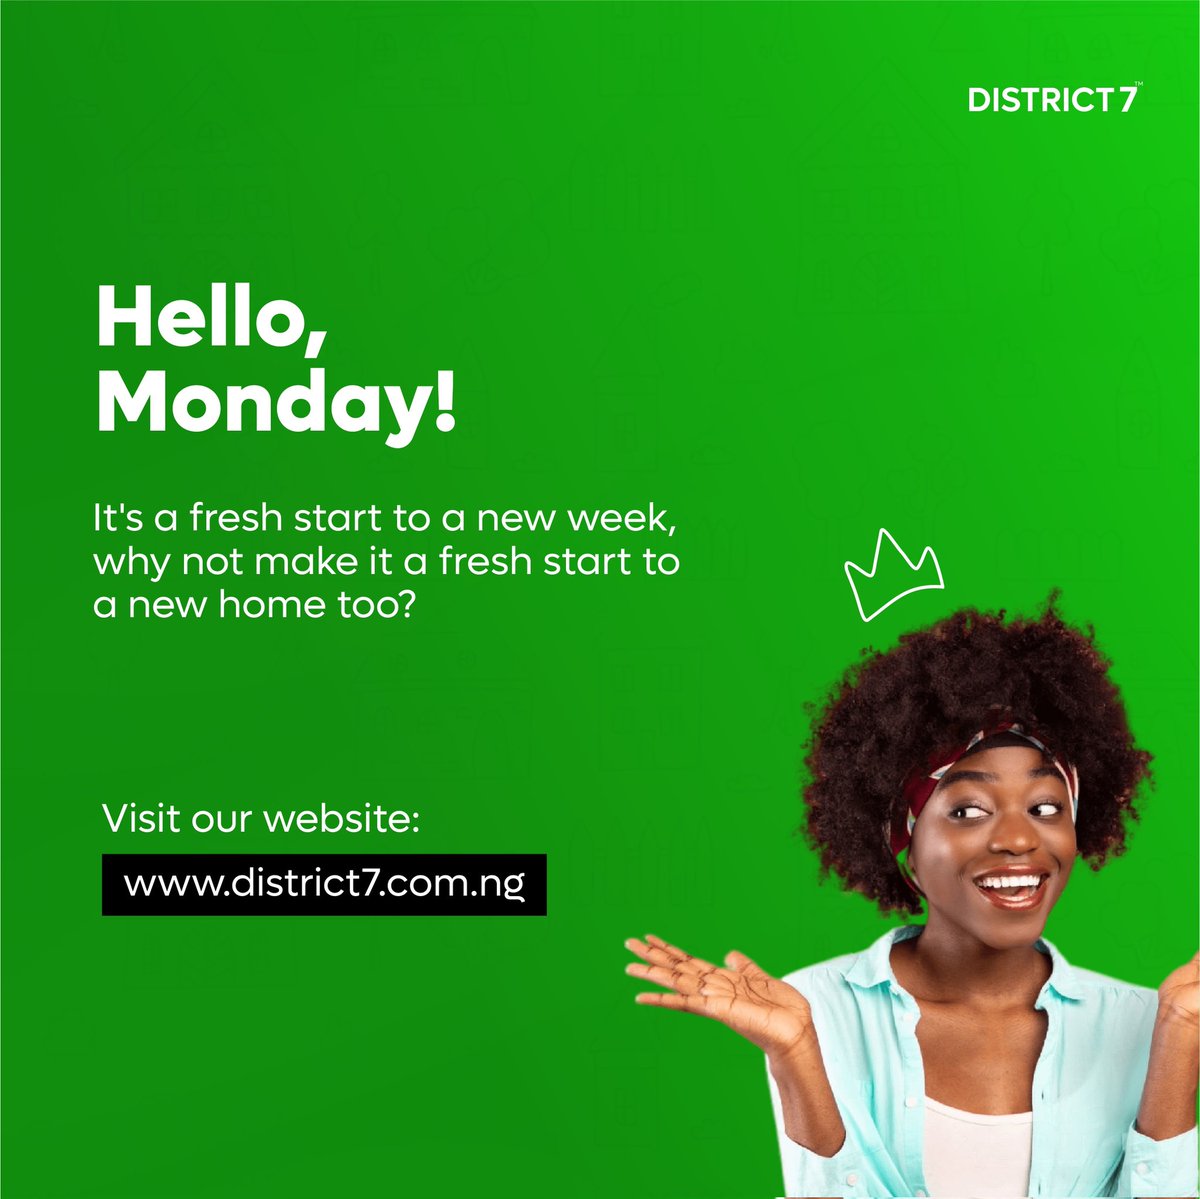 Make this week the start of something new! 
Find your perfect home with ease and start fresh. Let us help you find your 'home away from home.'
.
.
.
.
#district7 
#perfecthome 
#propertytech 
#easyhousehunting 
#election 
#election2023
#electionresults